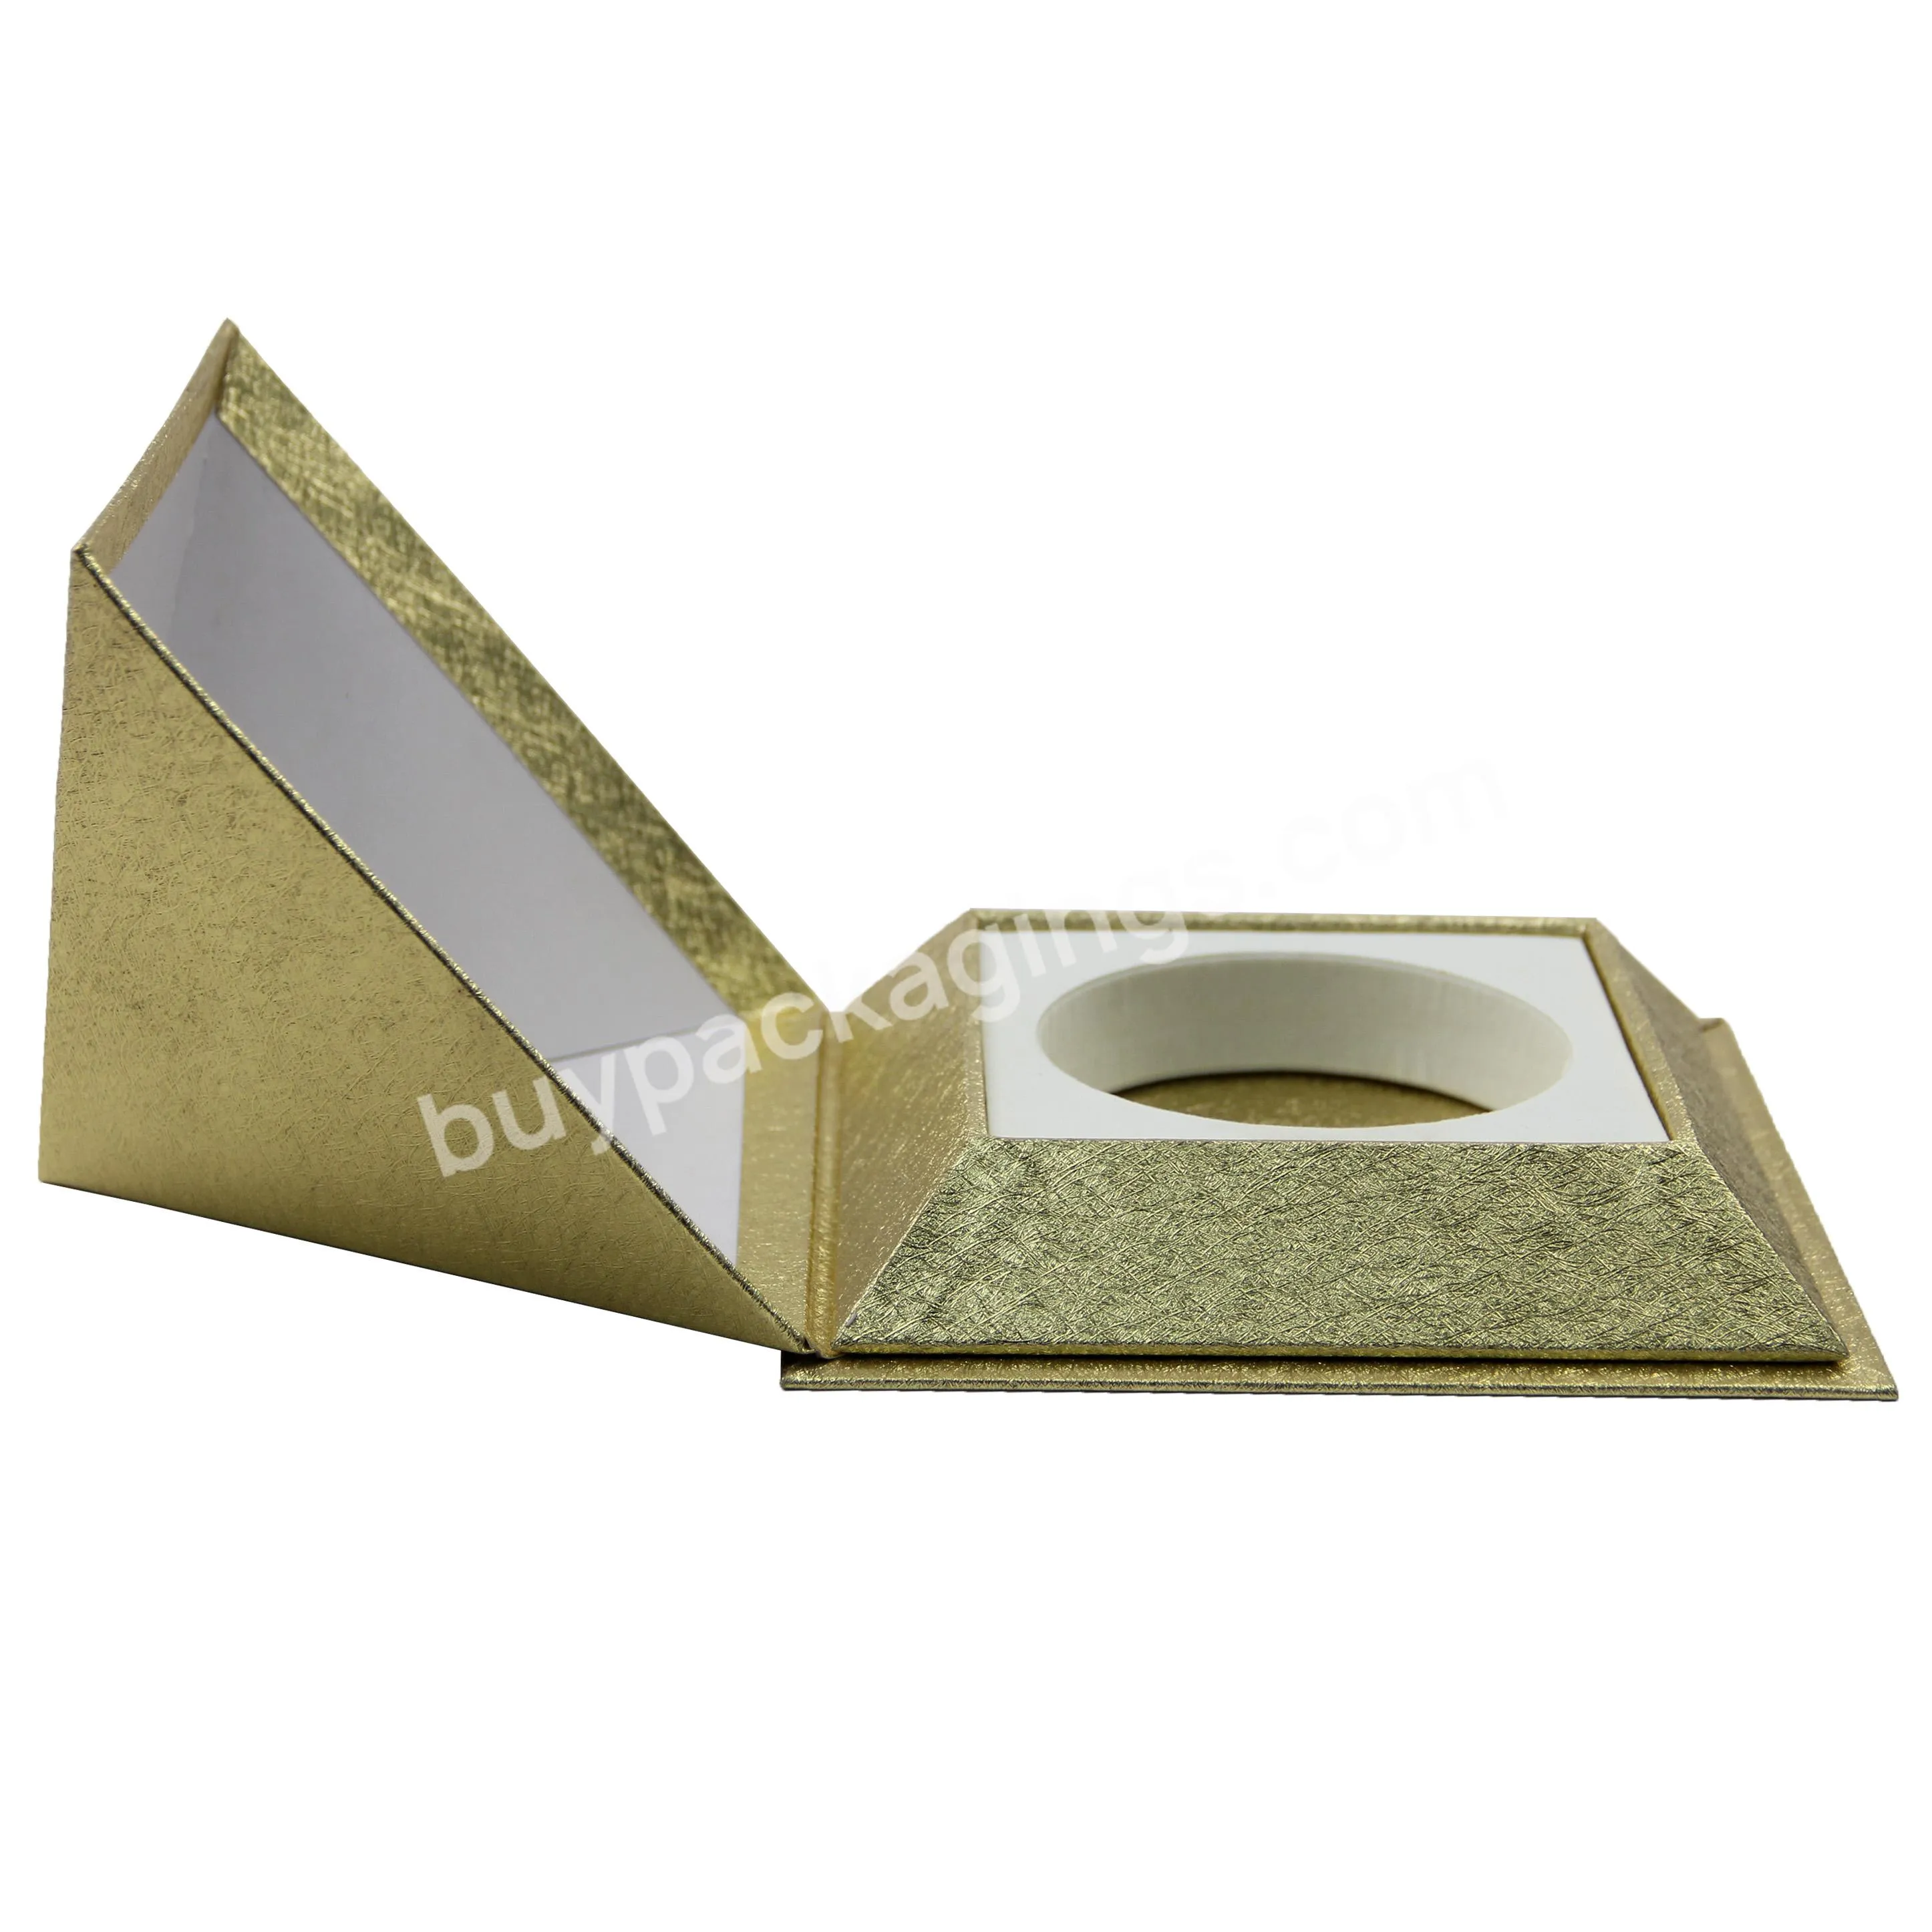 Creative glitter gold color paper triangle shape candle gift box